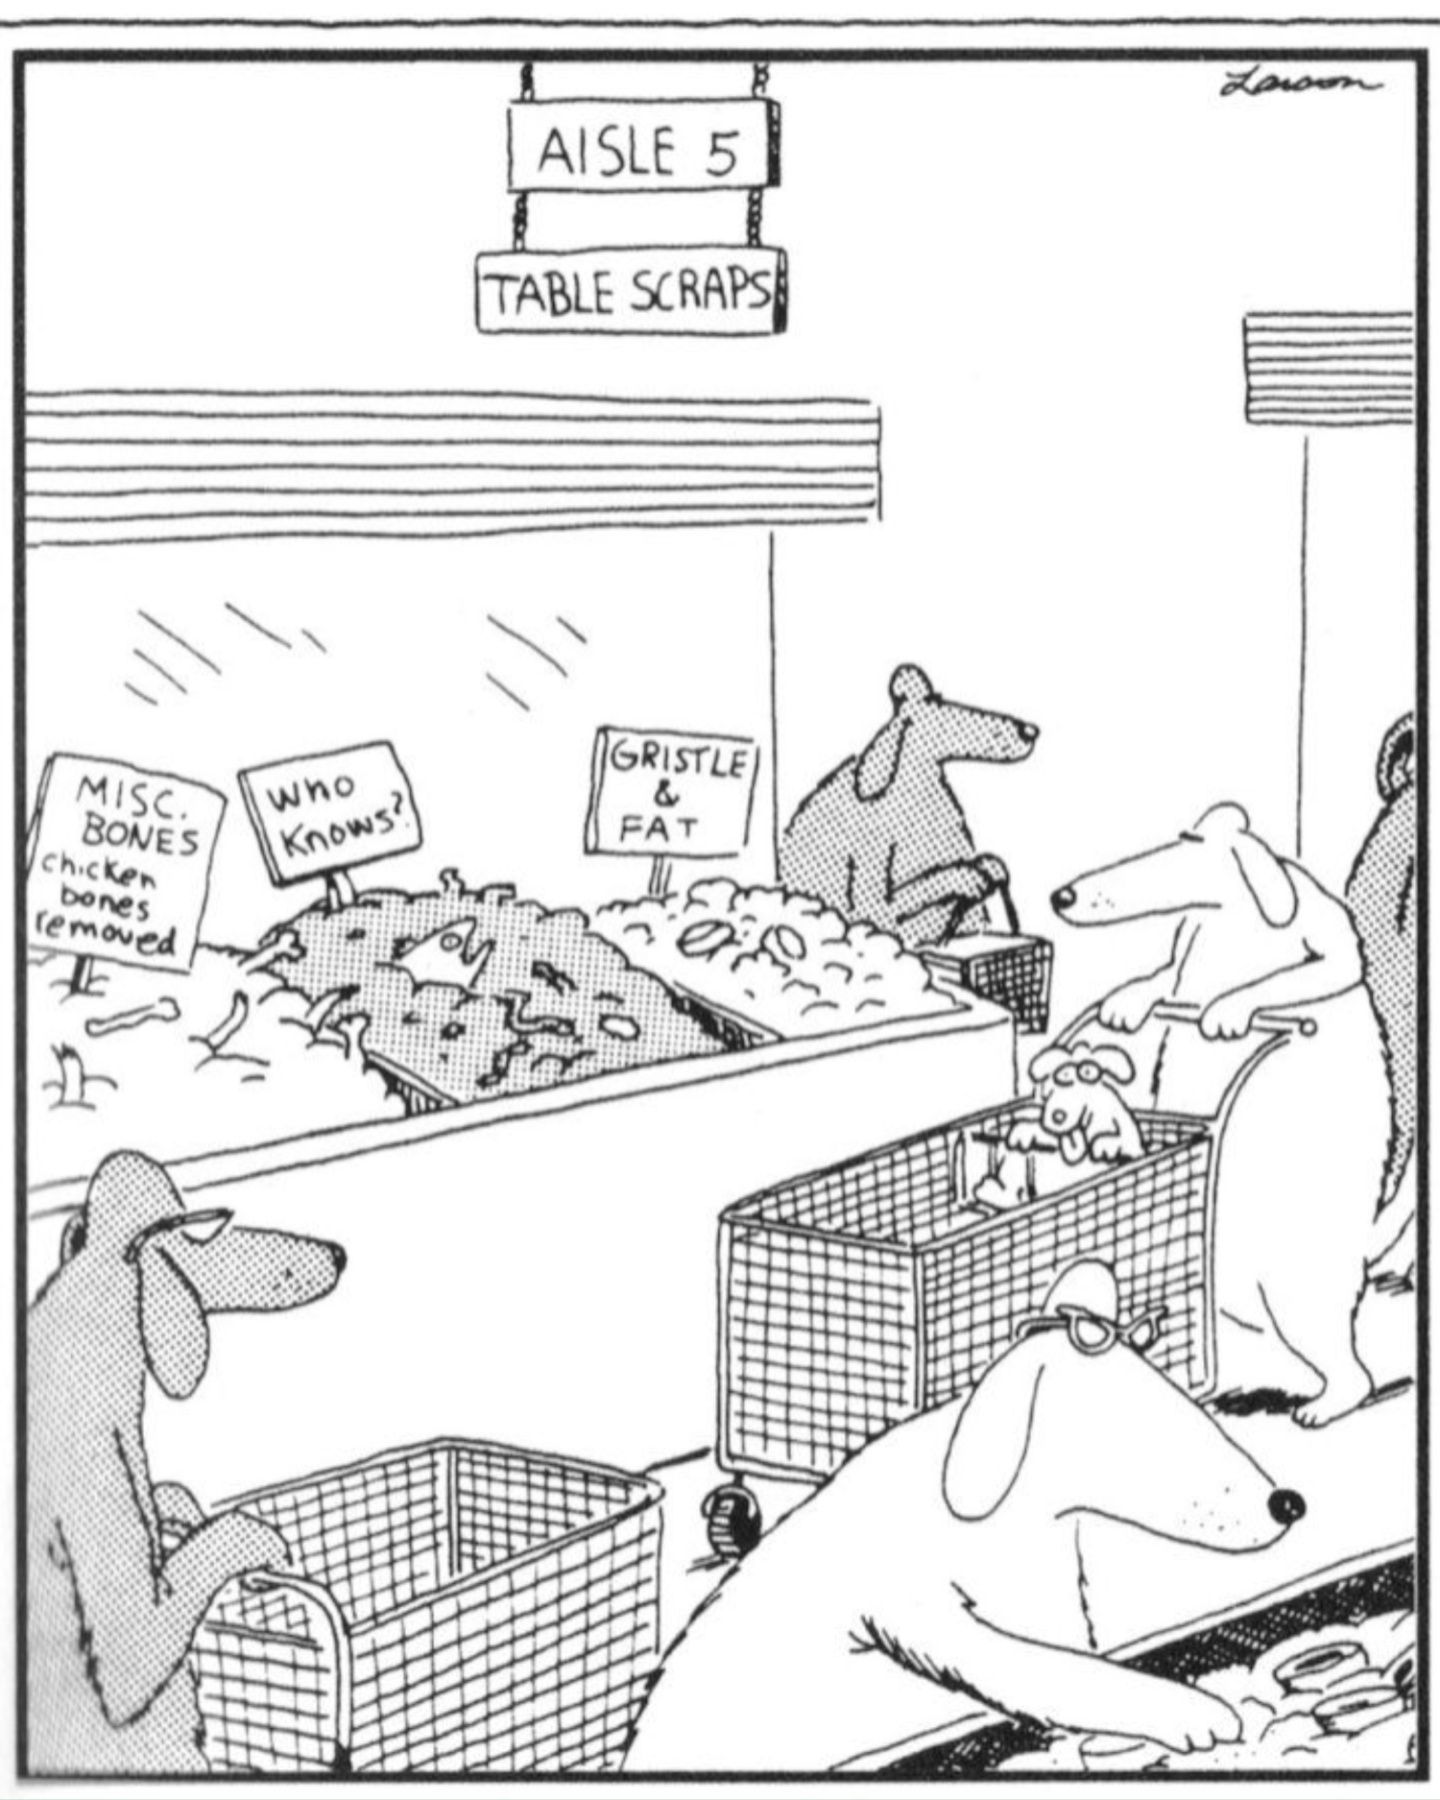 Far Side: Dogs looking at table scraps in grocery store aisles 